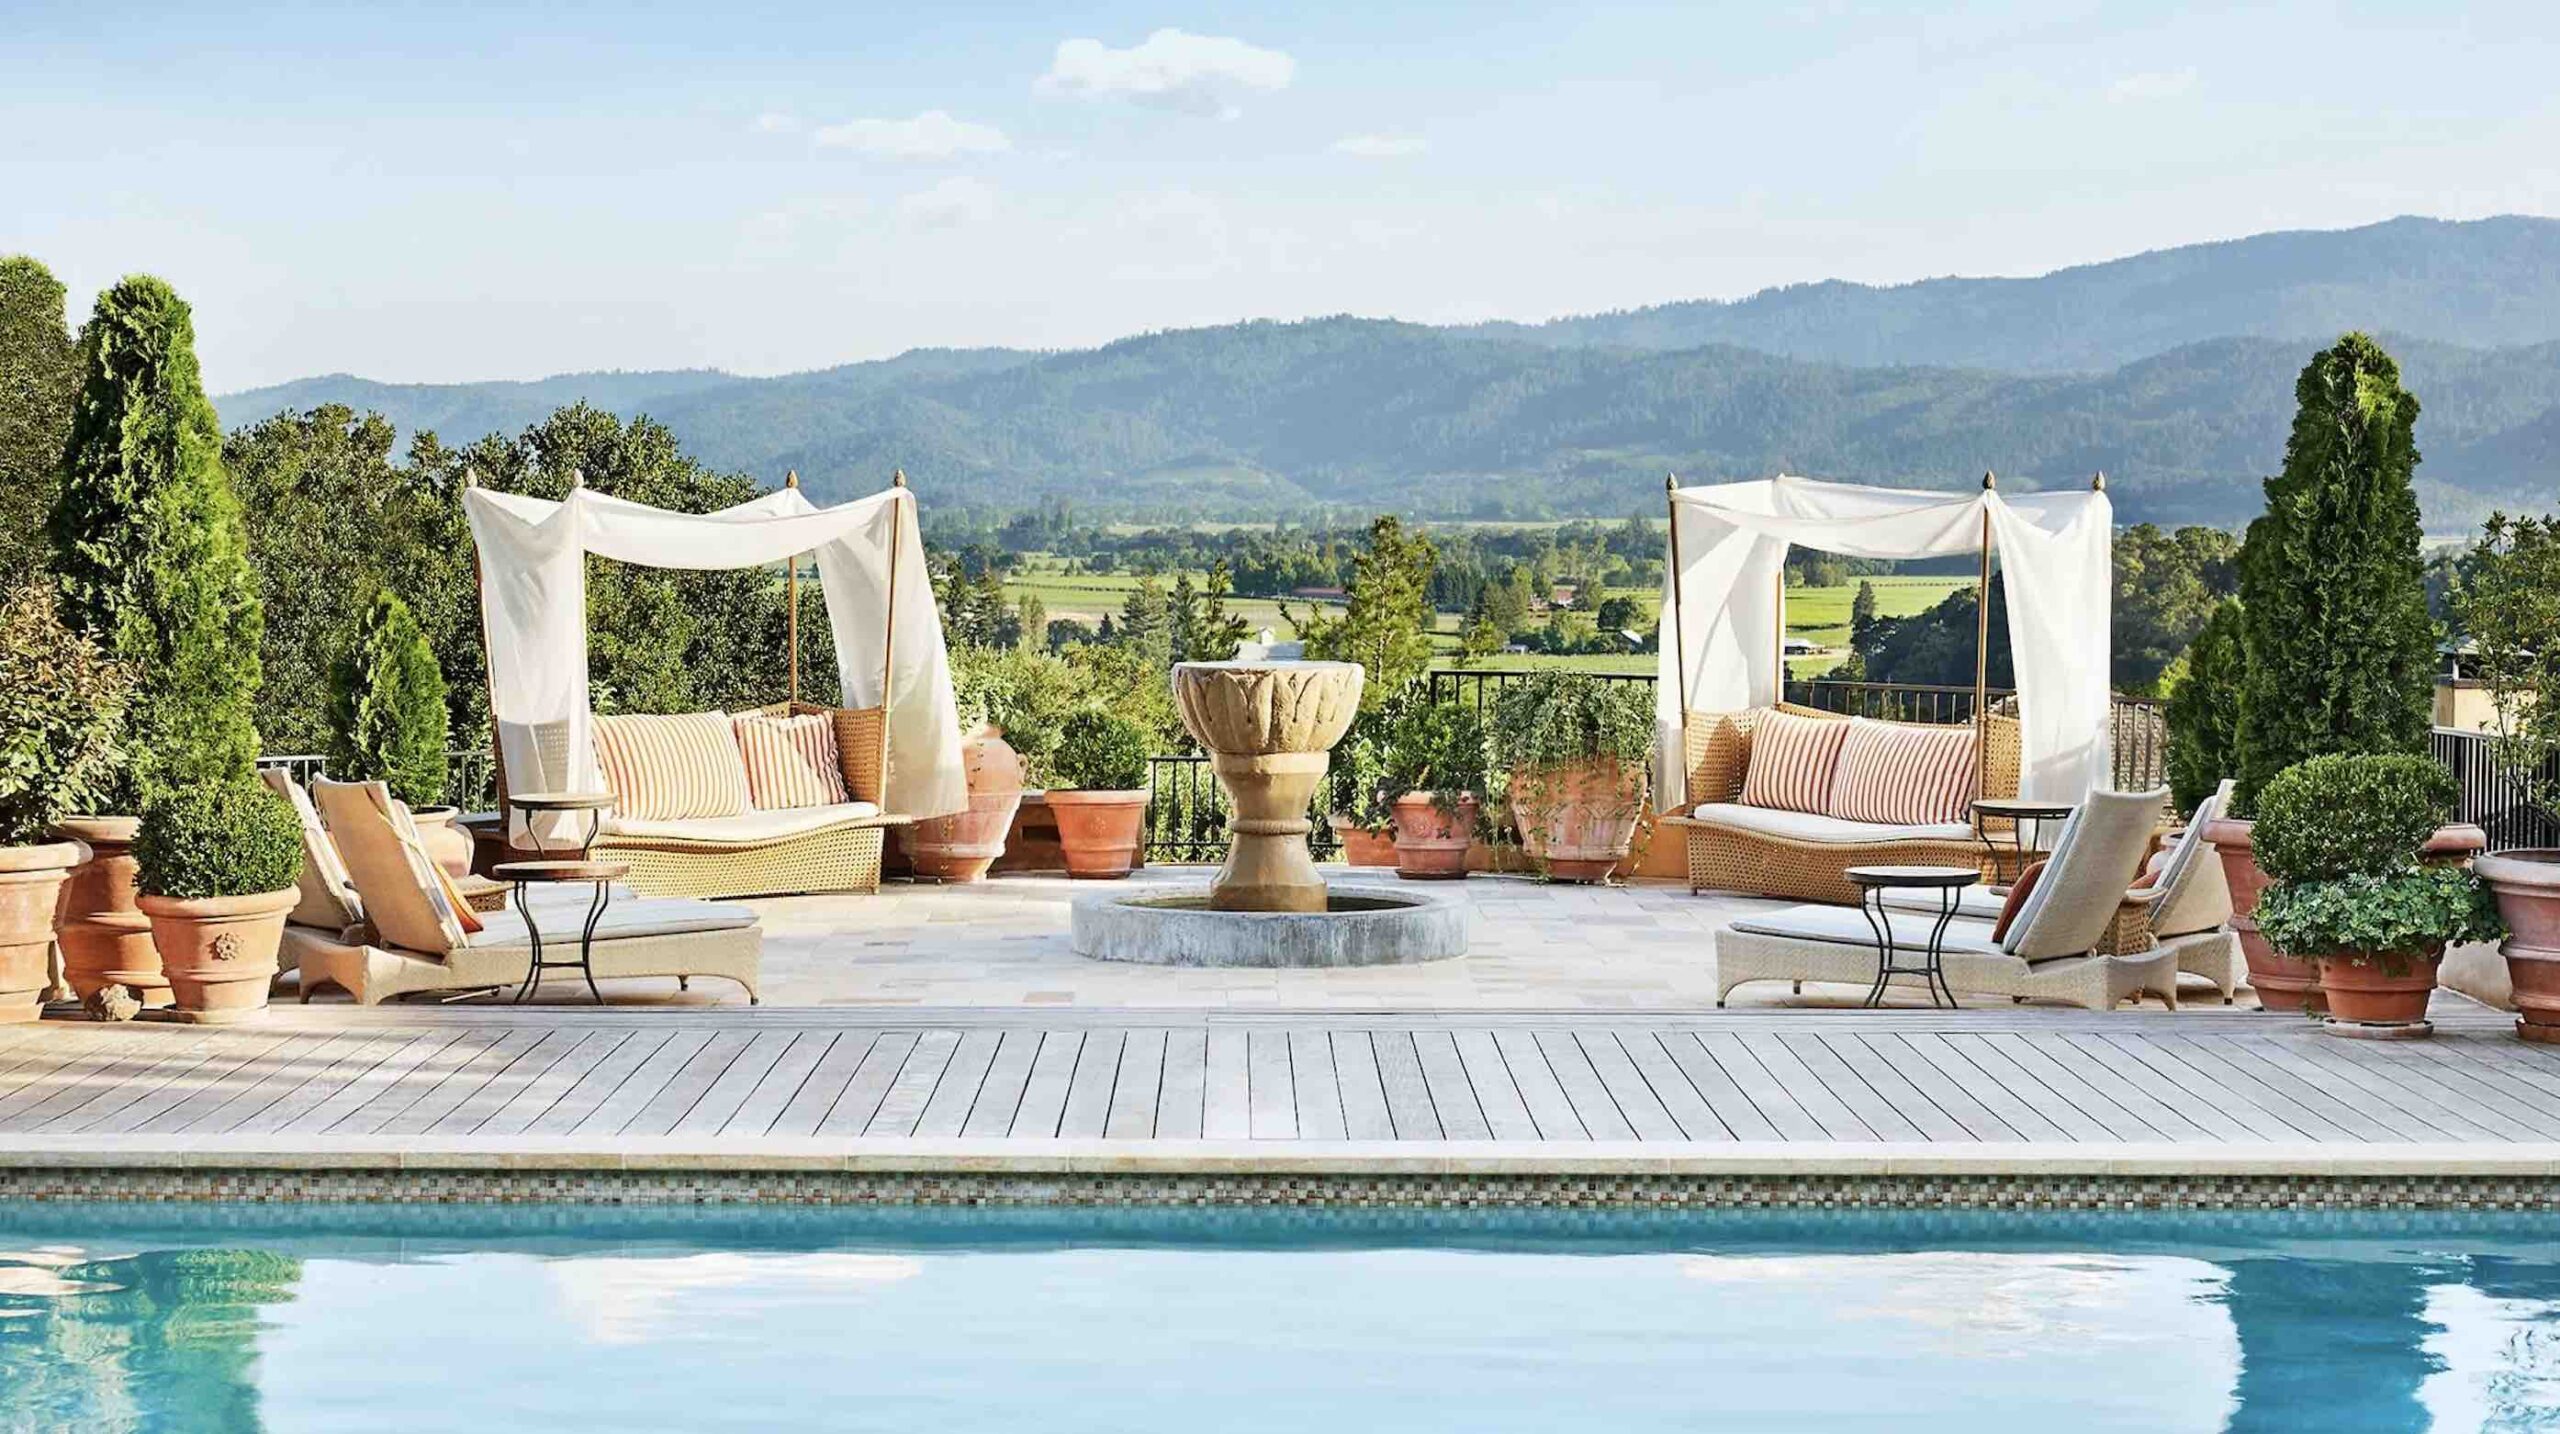 Auberge du Soleil pools and loungers at one of the best luxury Napa hotels